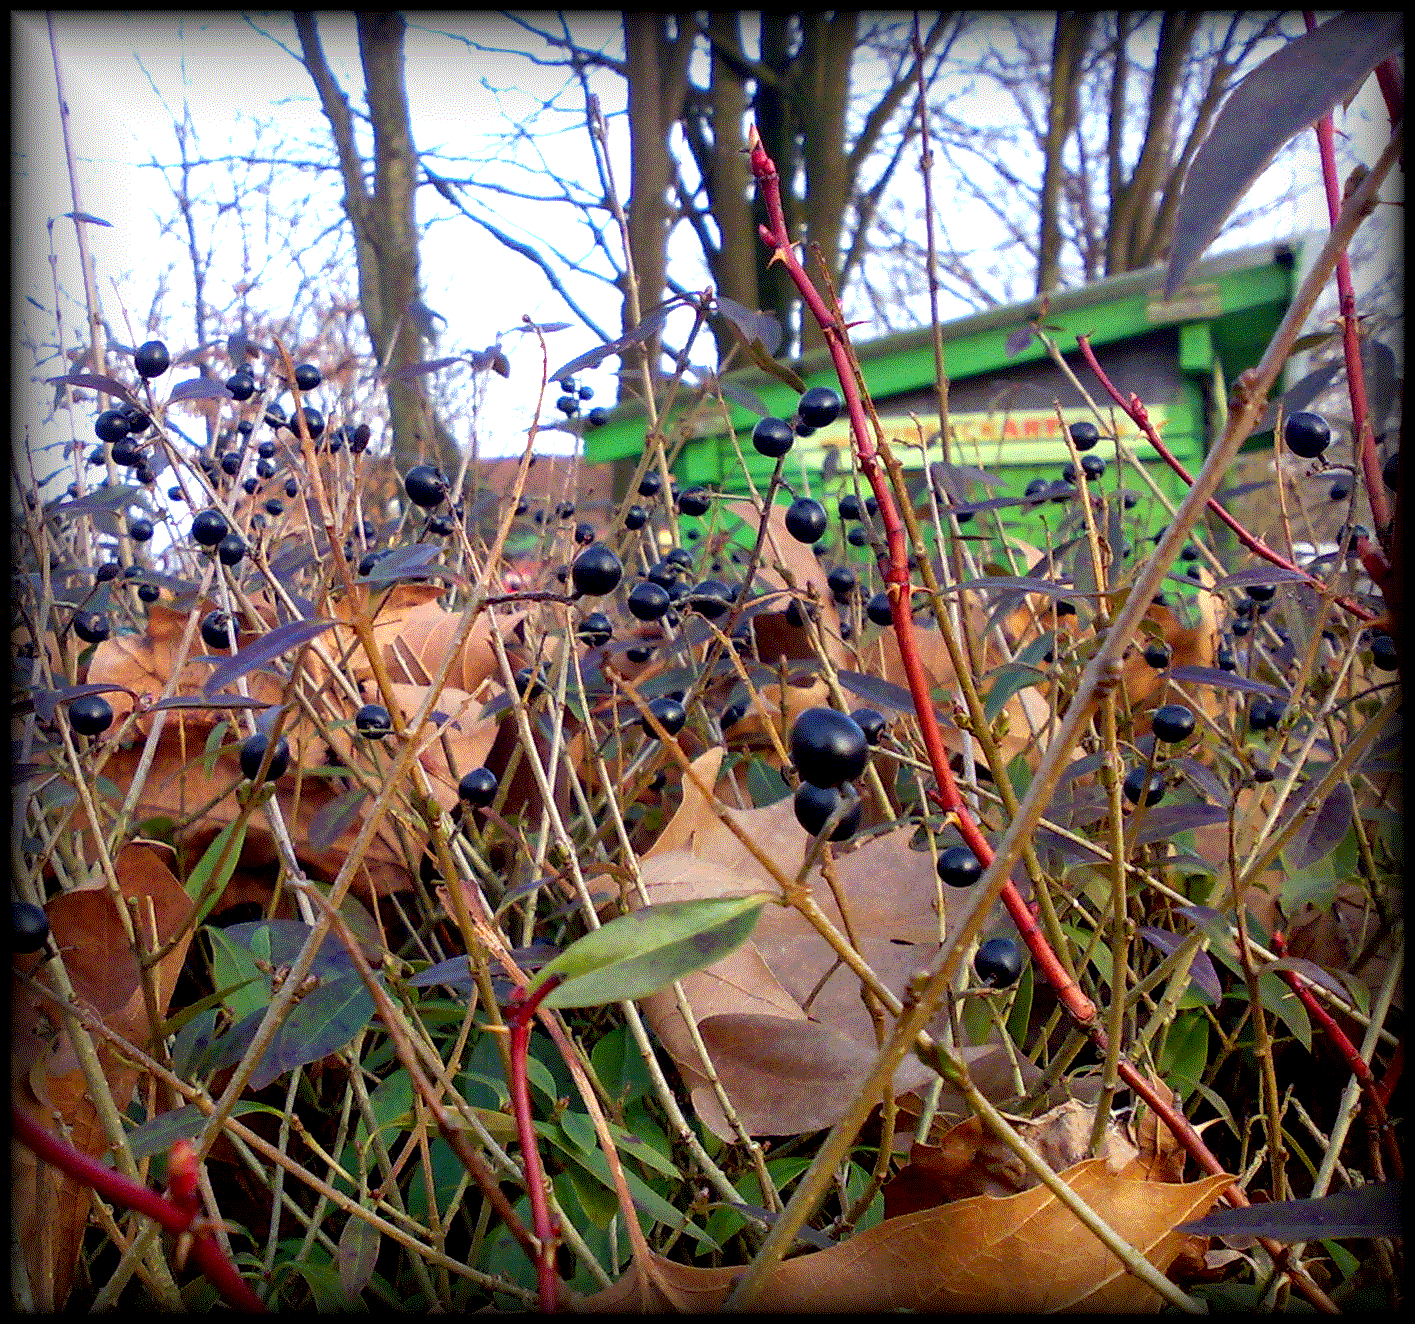 Photograph: Berries growing on a wilted bush with discarded leaves stuck all over it; green rundown structure in the background